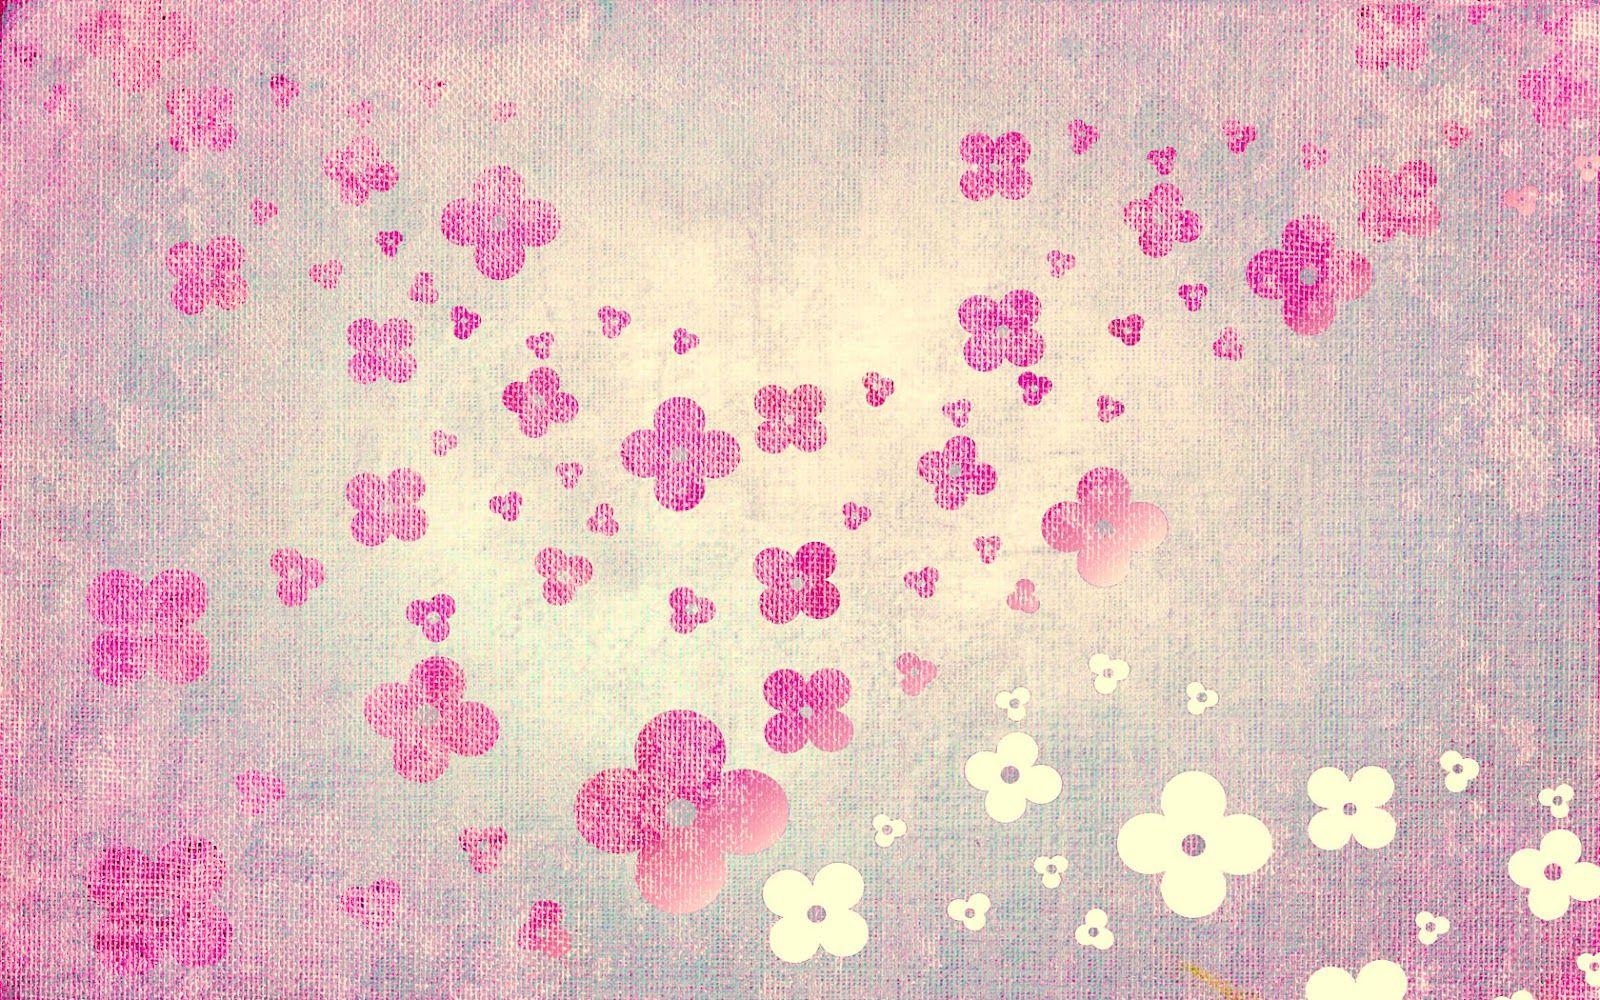 tumblr background cute pink 9. Background Check All